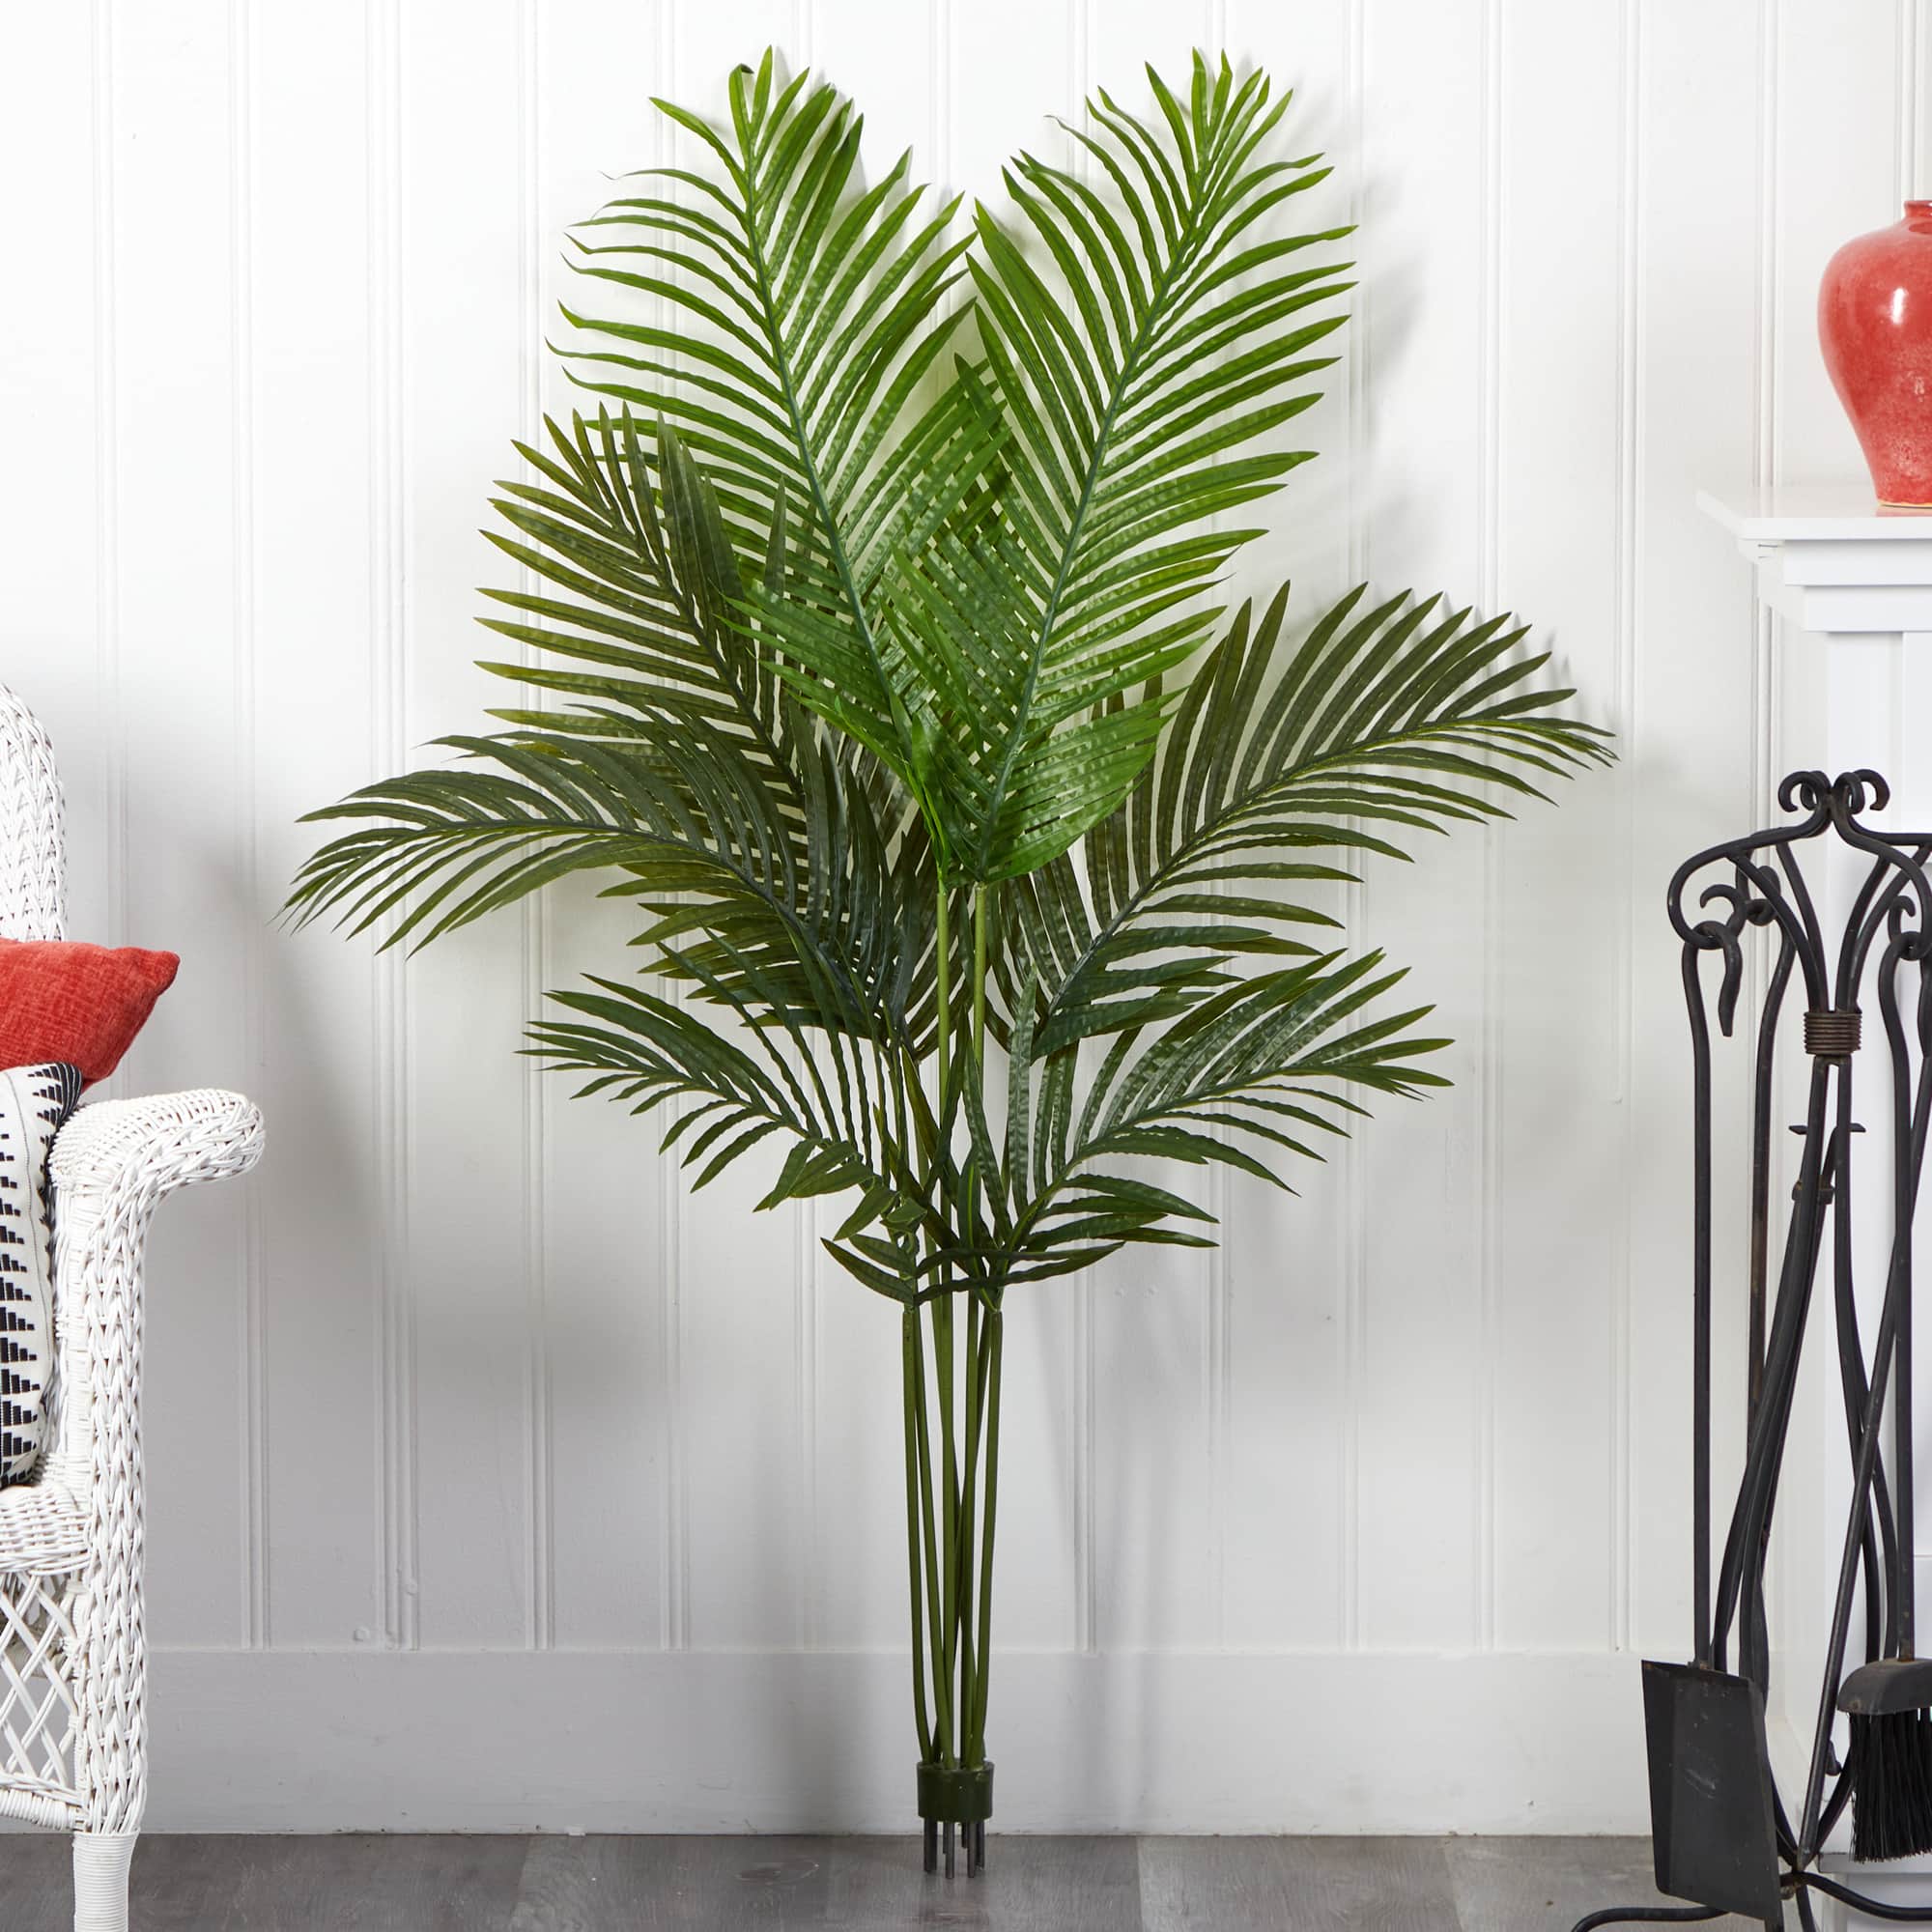 4ft. Artificial Paradise Palm Tree